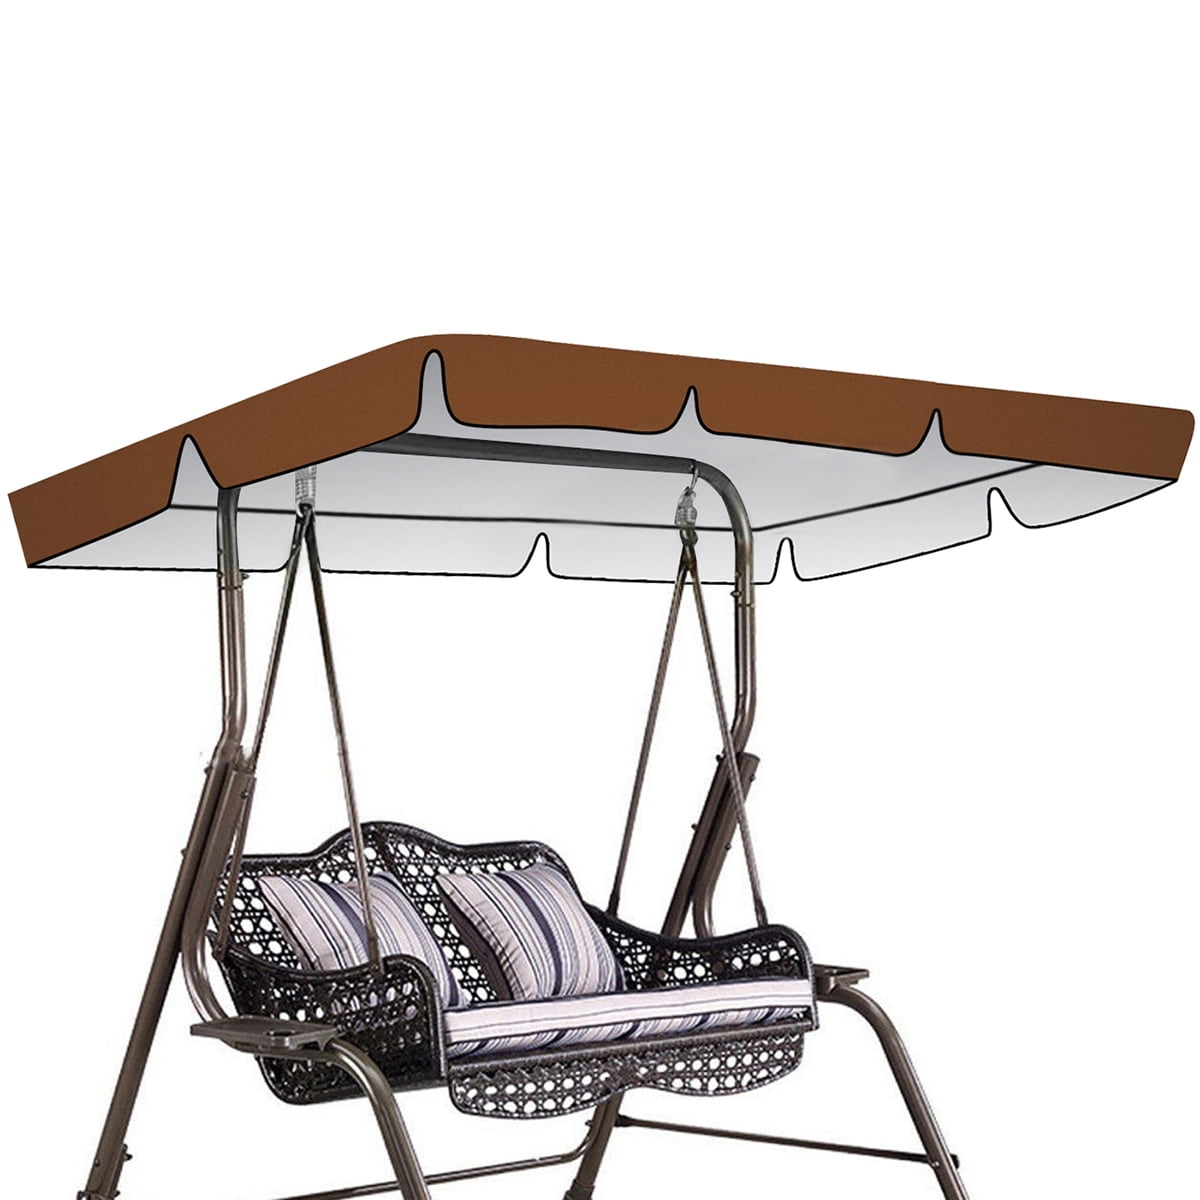 Swing Canopy Patio Outdoor Hammock Furniture Porch Person 3 Seat Cover Yard Top